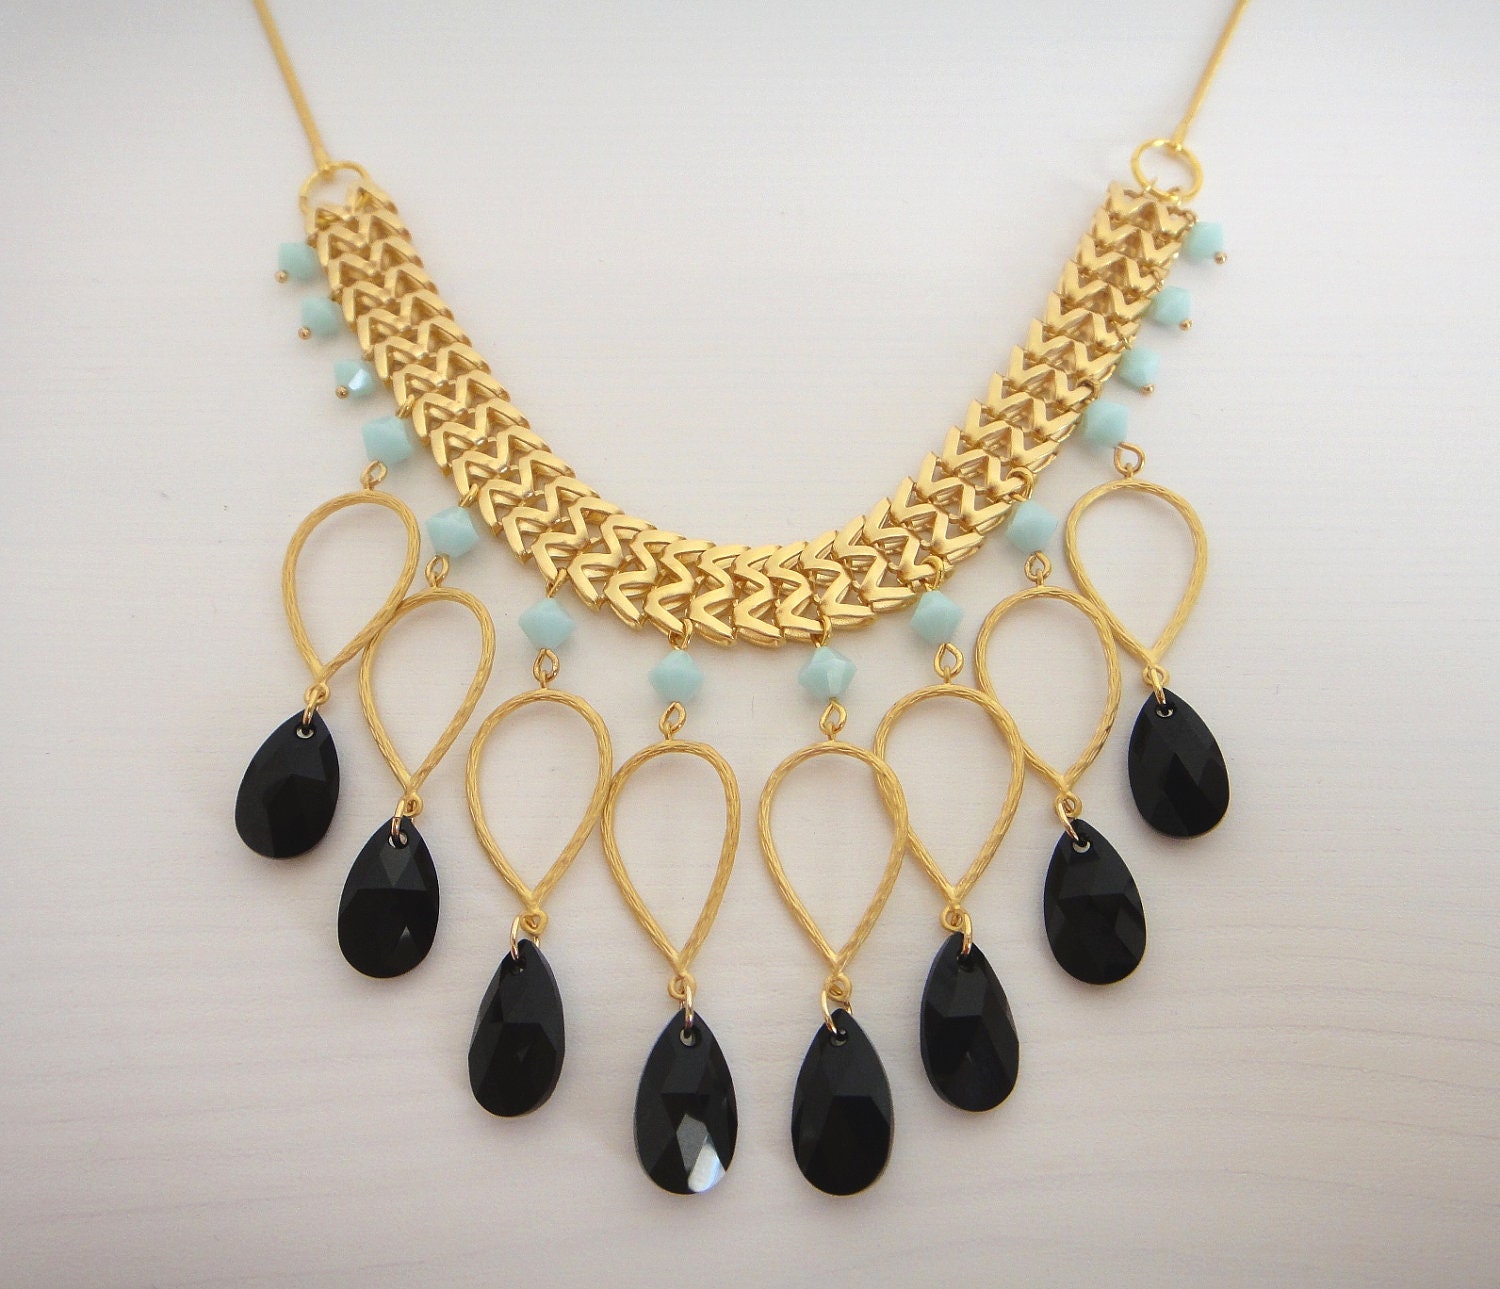 Gold, black and turquoise (swarovski) statement necklace